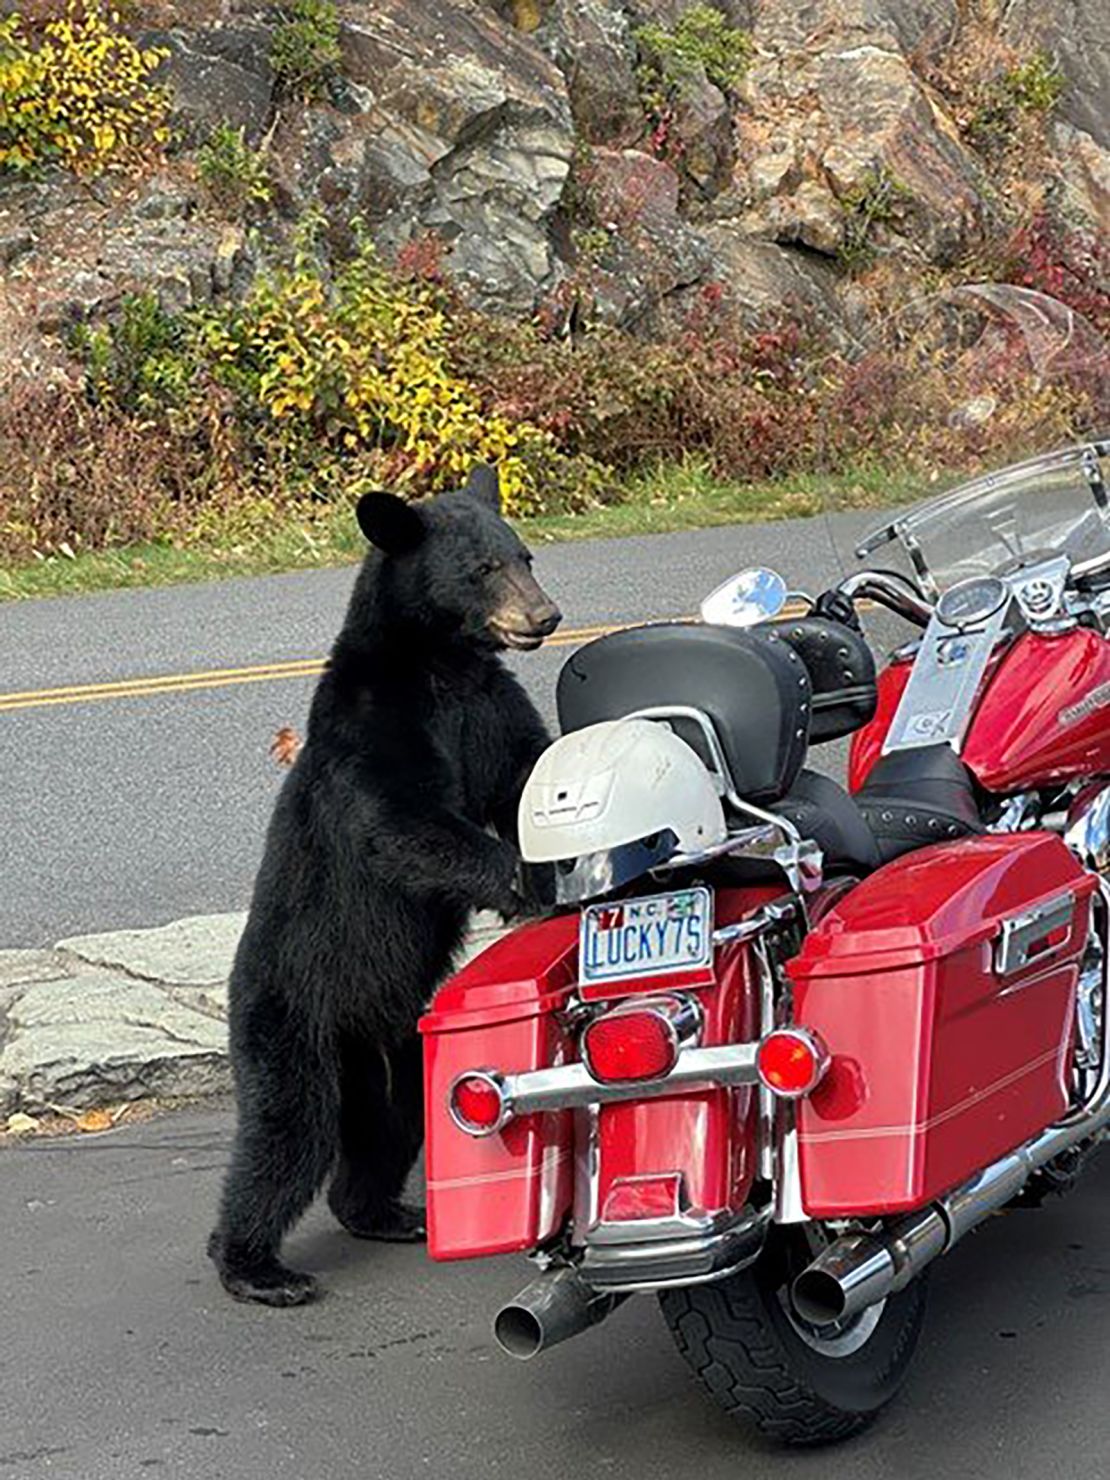 A young black bear took a few bites out of Jeff Guffey's motorcycle seat several days before a section of the parkway was closed.